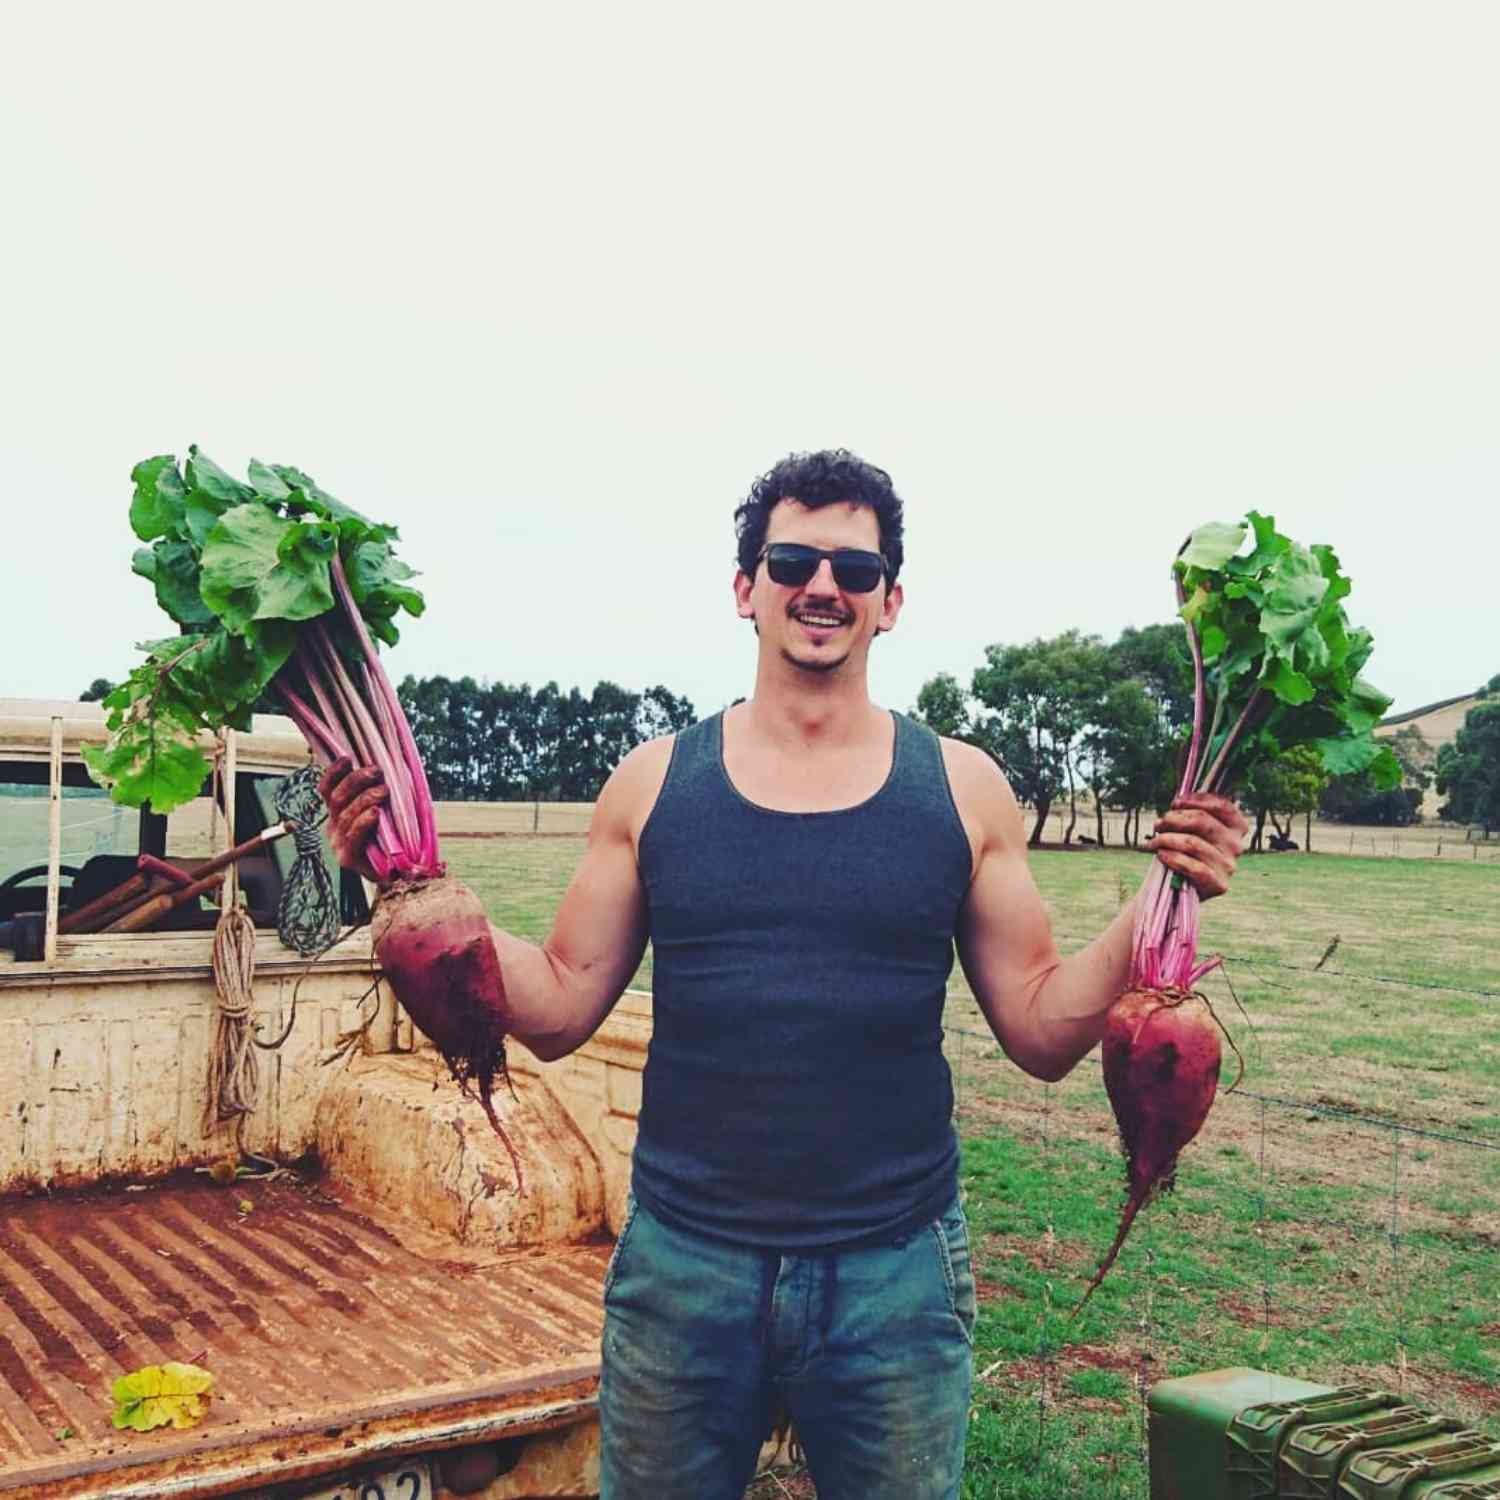 When Local Organic Delivery began, Serge was an organic farmer and grew all the organic veggies himself